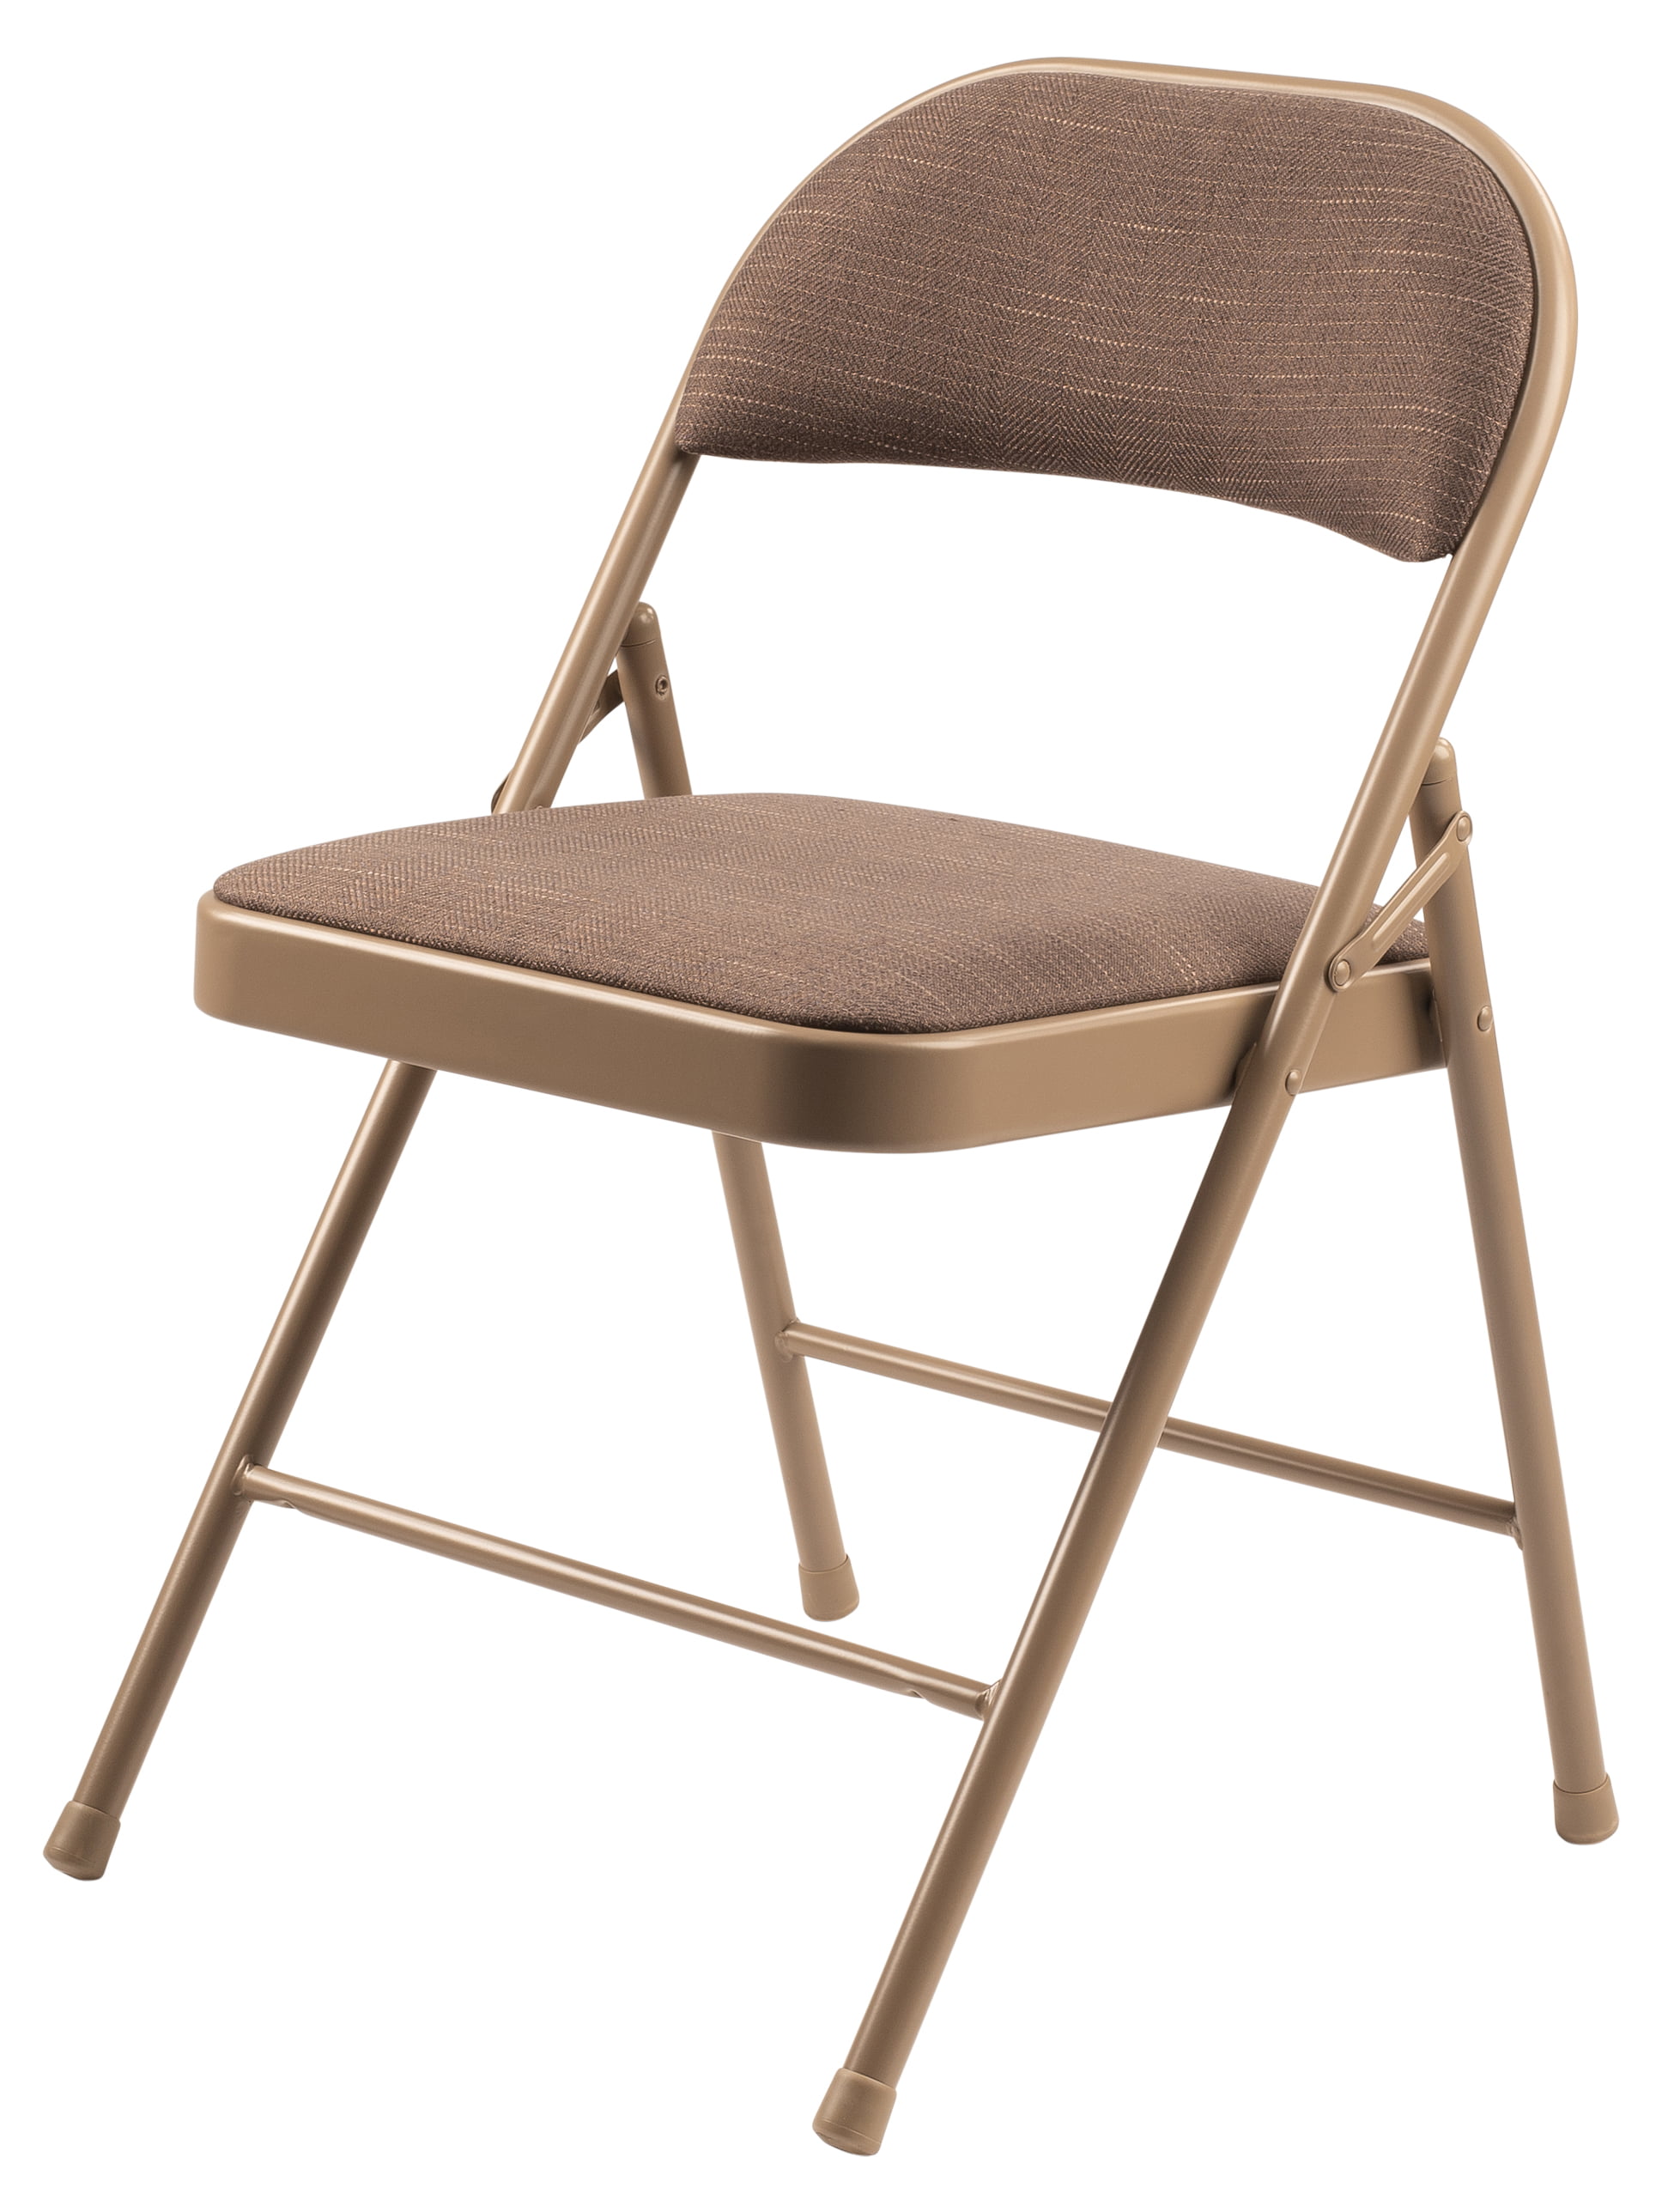 Commercialine® 900 Series Fabric Padded Folding Chair, Star Trail Brown